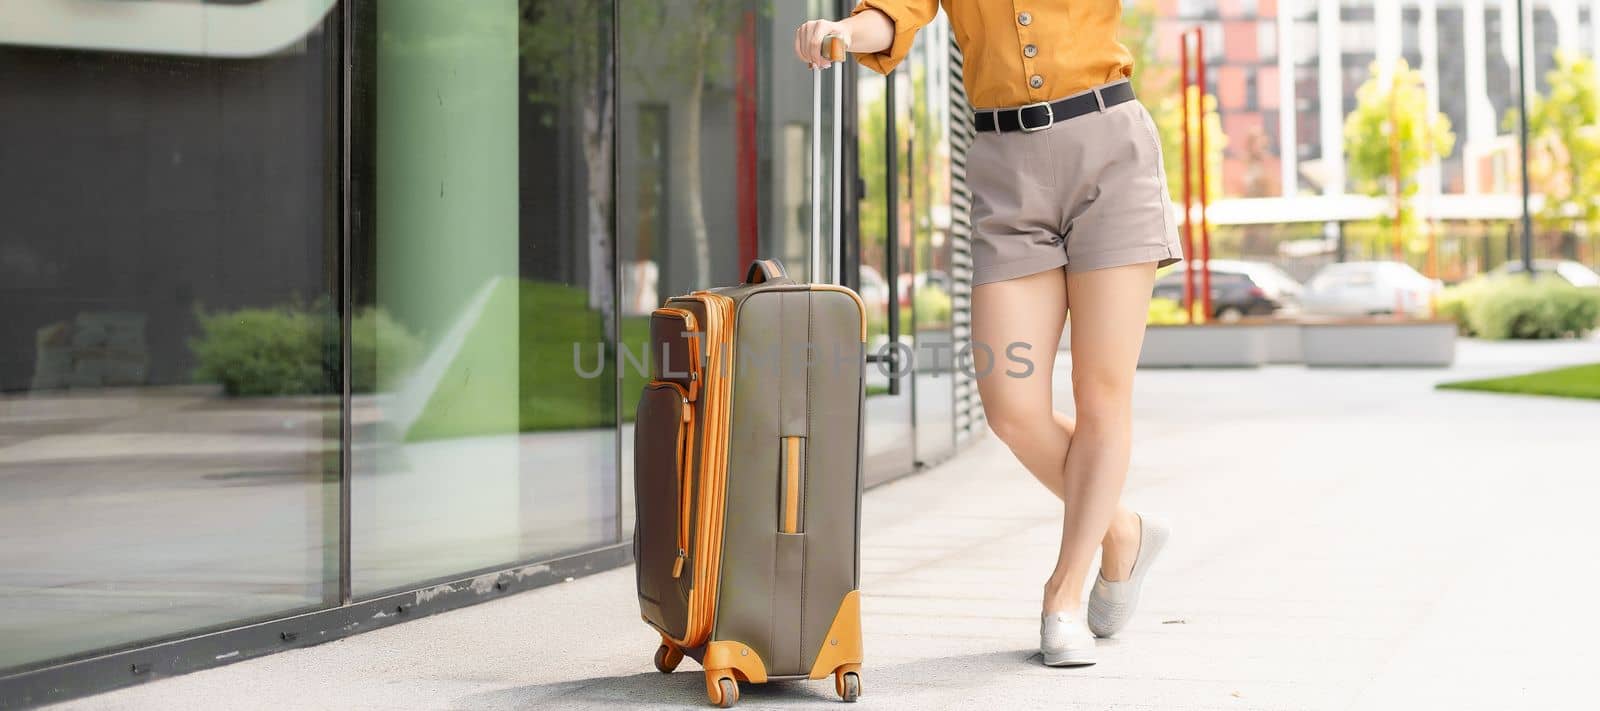 Traveler suitcase, woman carrying a suitcase in a travel location on holidays trip with lens flare technique, traveling on holidays concepts by Andelov13